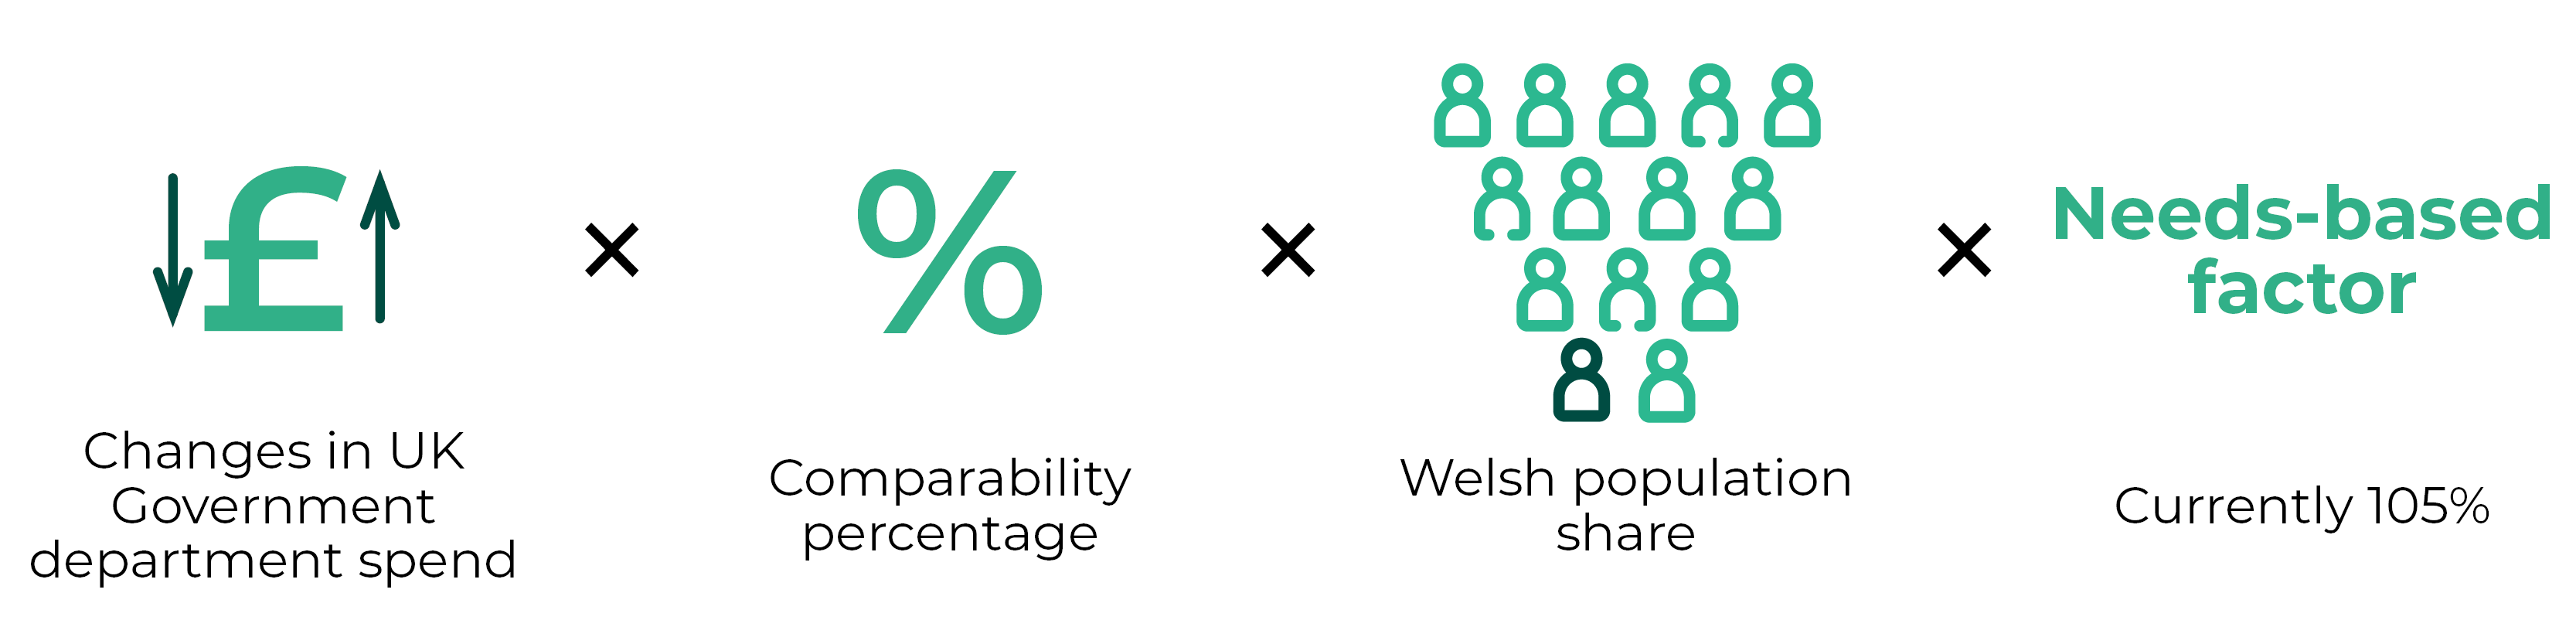 Infographic showing that the Barnett formula is the product of changes in UK Government department spend, a comparability percentage, the Welsh population share and a needs-based factor currently set at 105%.